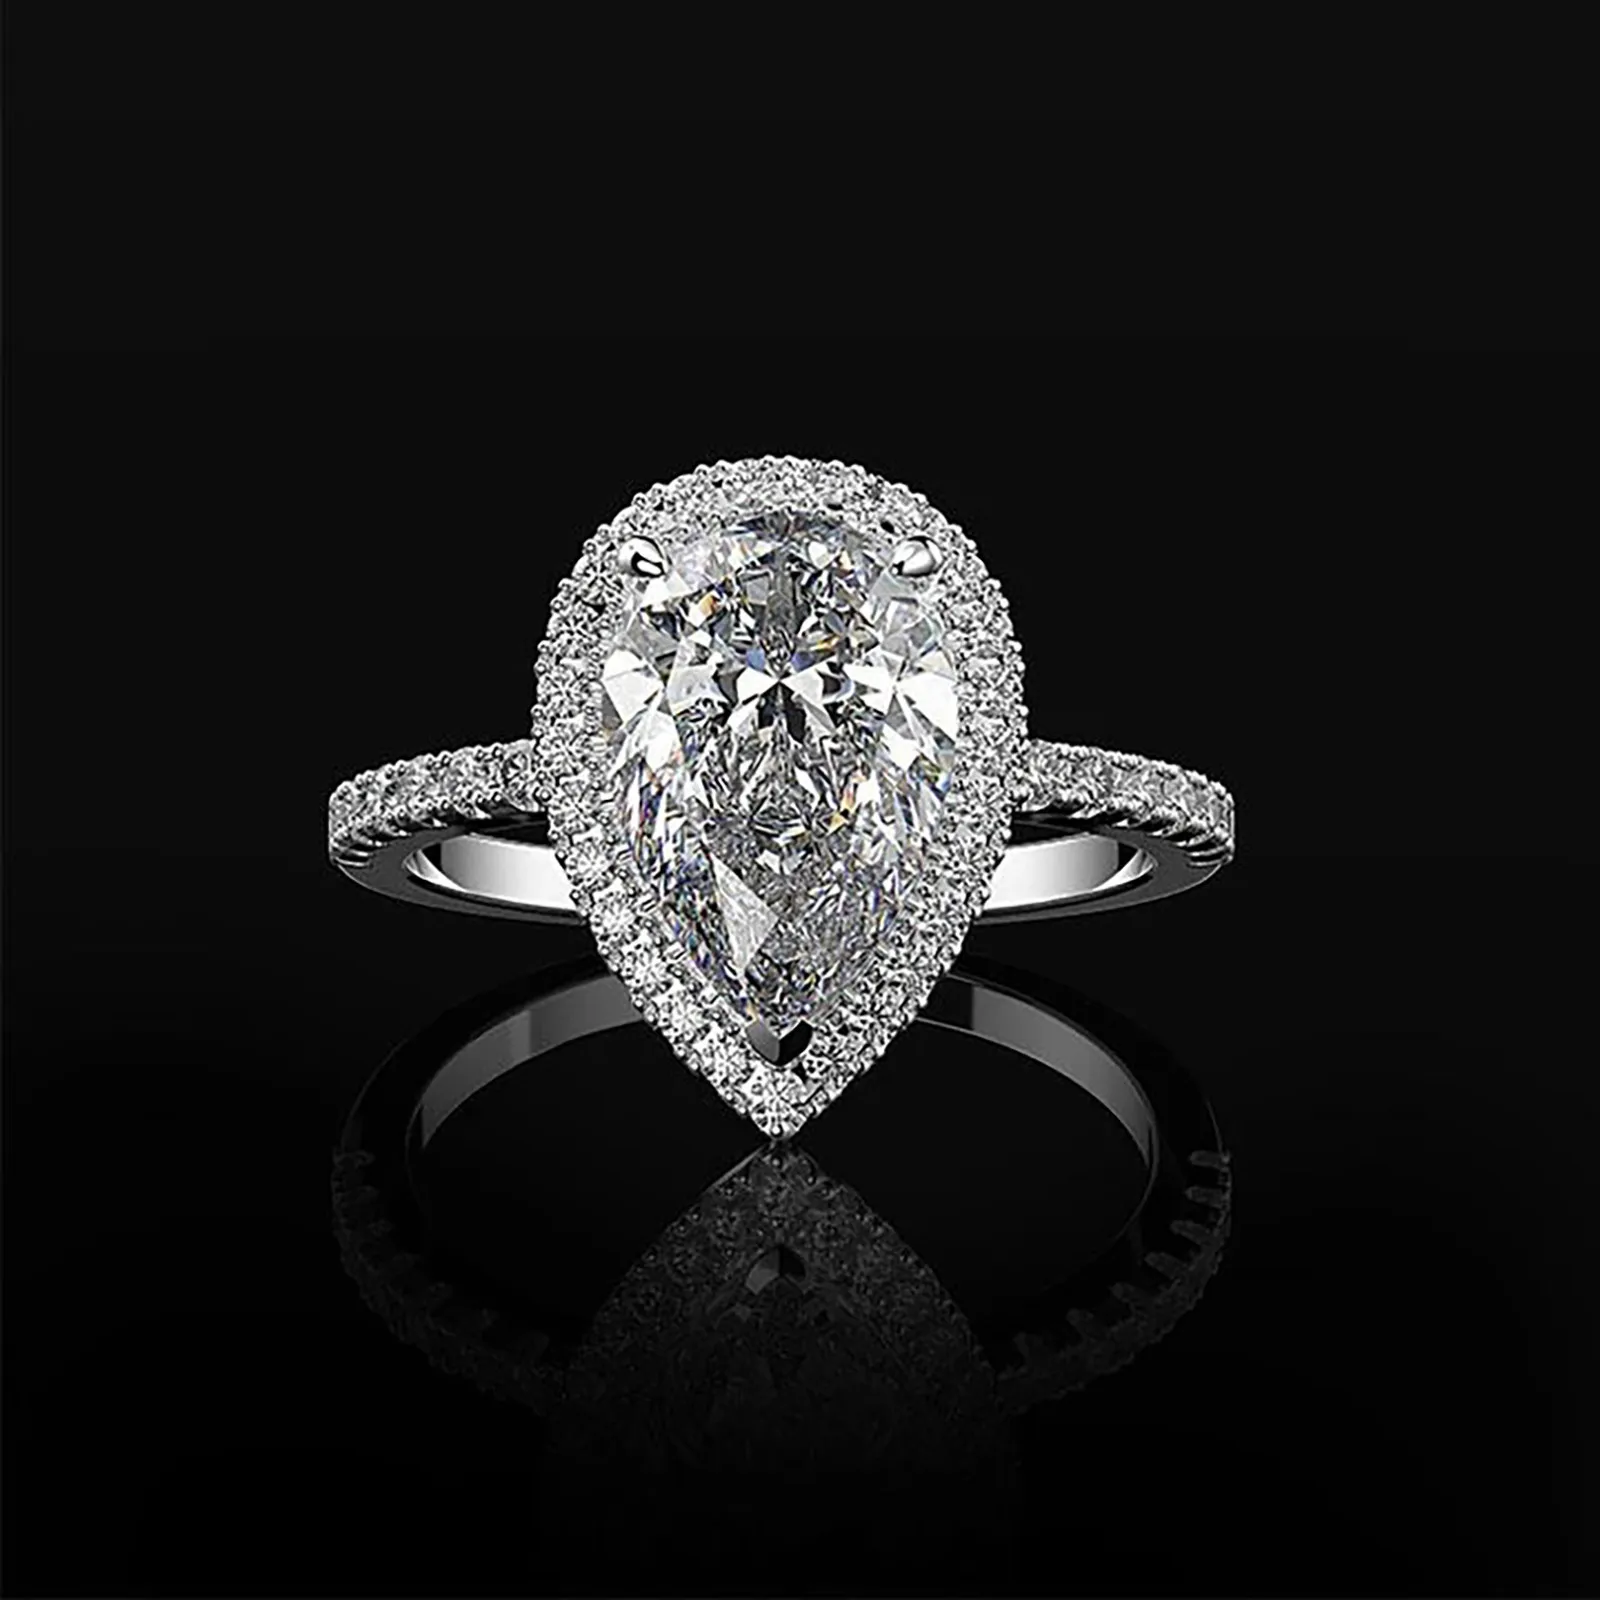 Diamond Hollow Carving Water Shaped Full Shaped Ring Fashion Drop Love Diamond Engagement Rings Wedding Band For Women